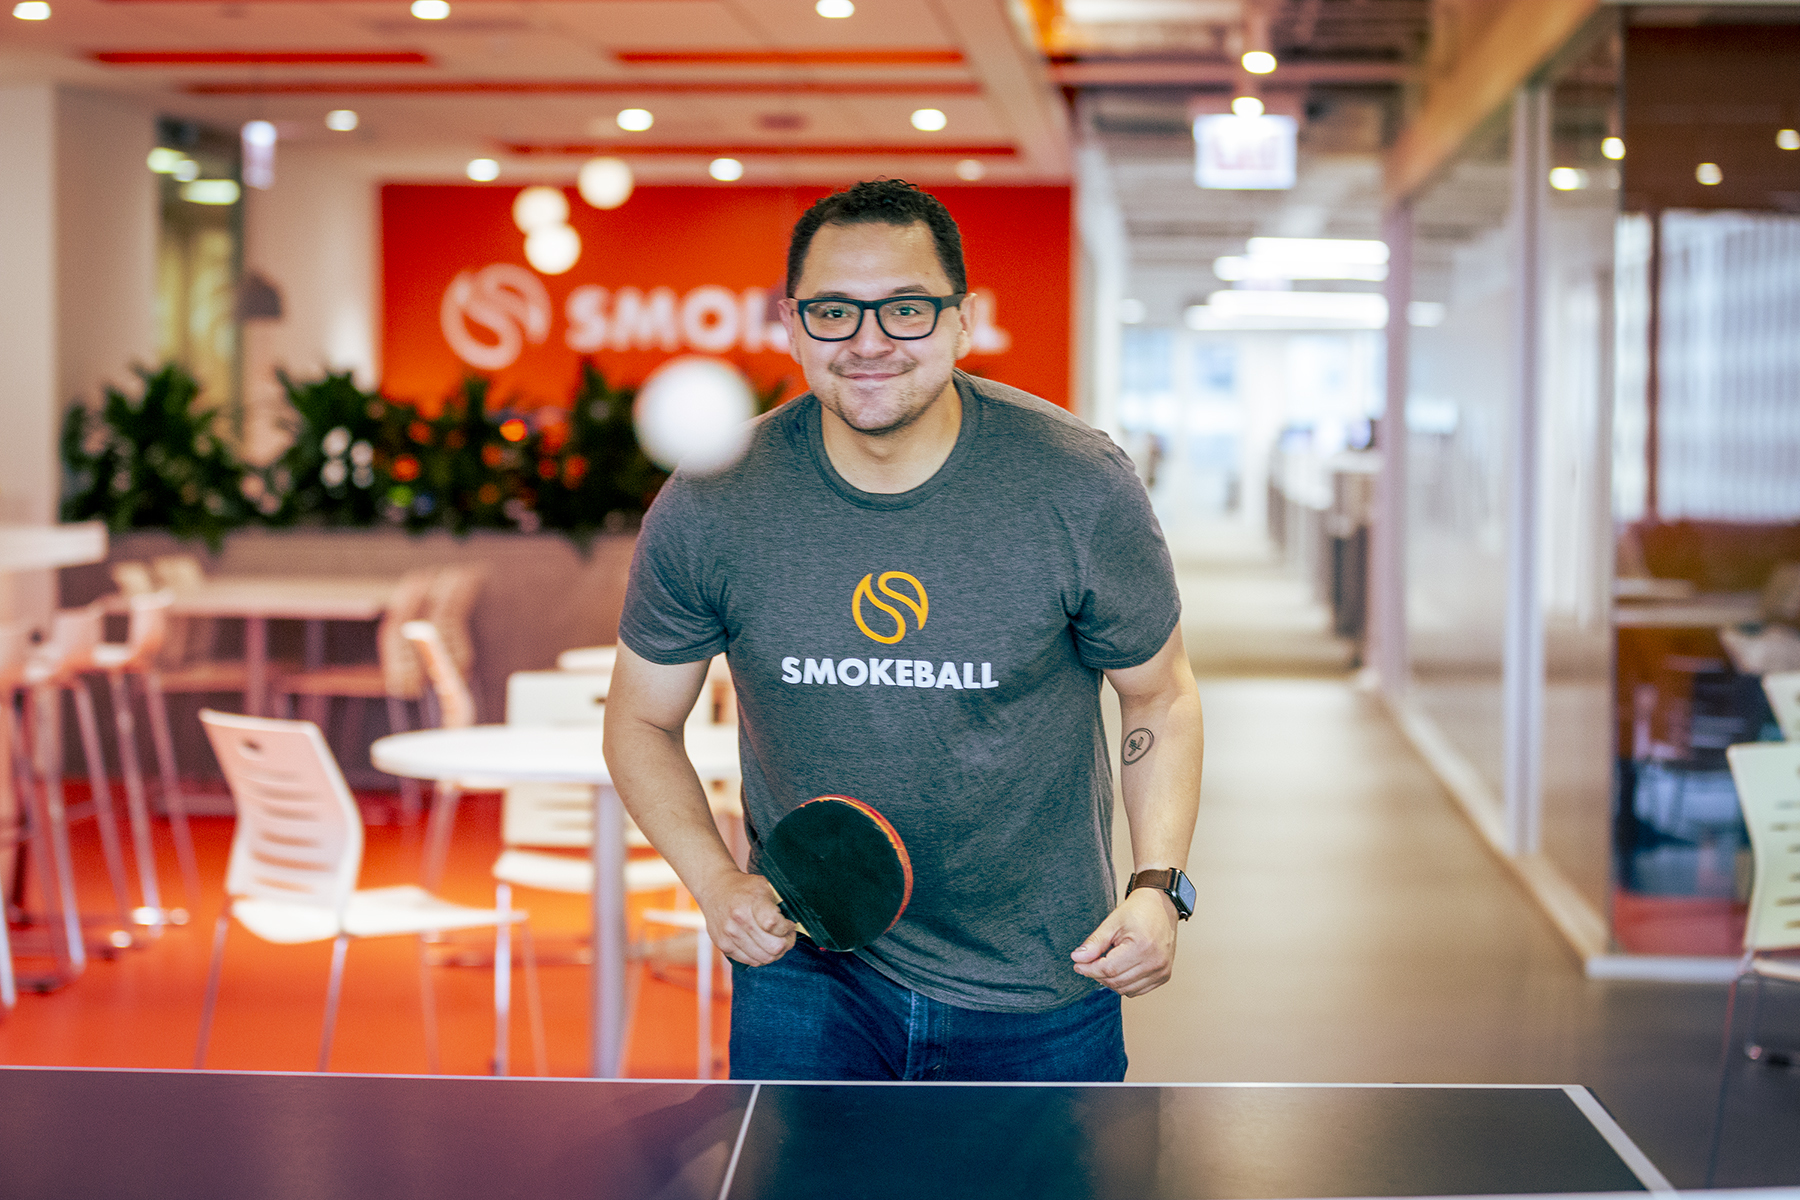 Employee at Smokeball plays ping pong in the office